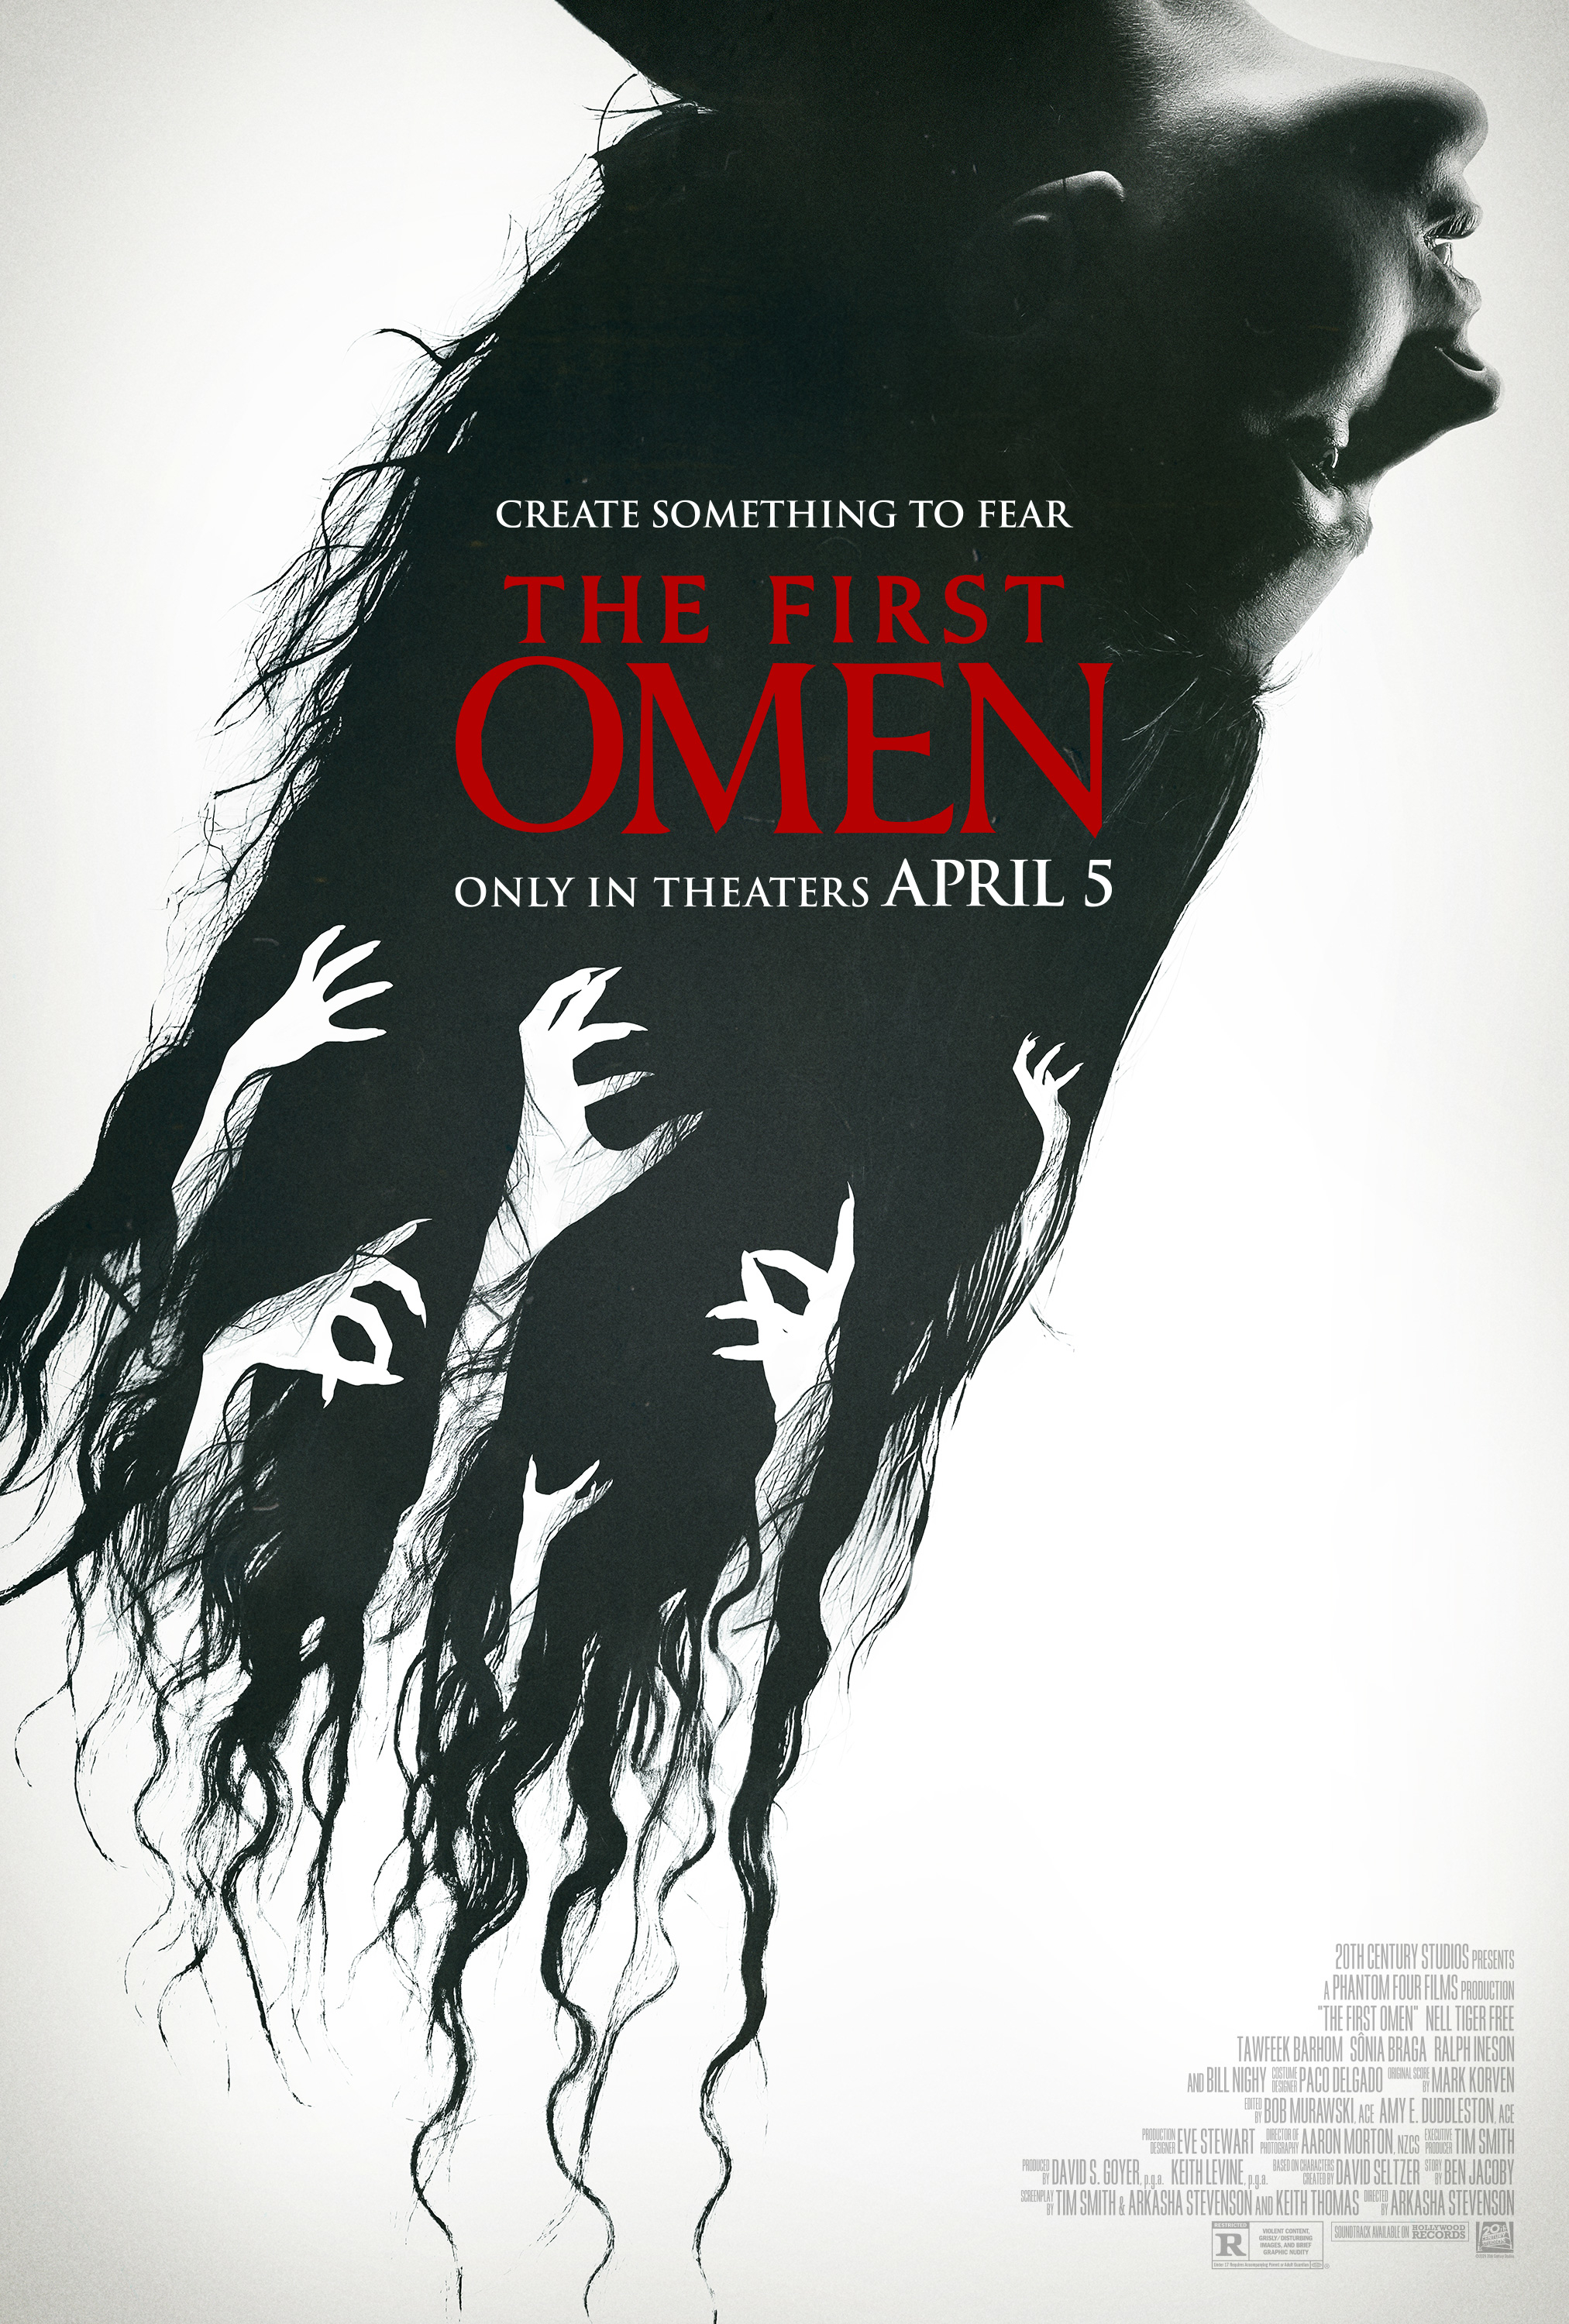 Promotional poster for &quot;The First Omen&quot; featuring a silhouetted profile with eerie hands reaching upwards. In theaters April 5